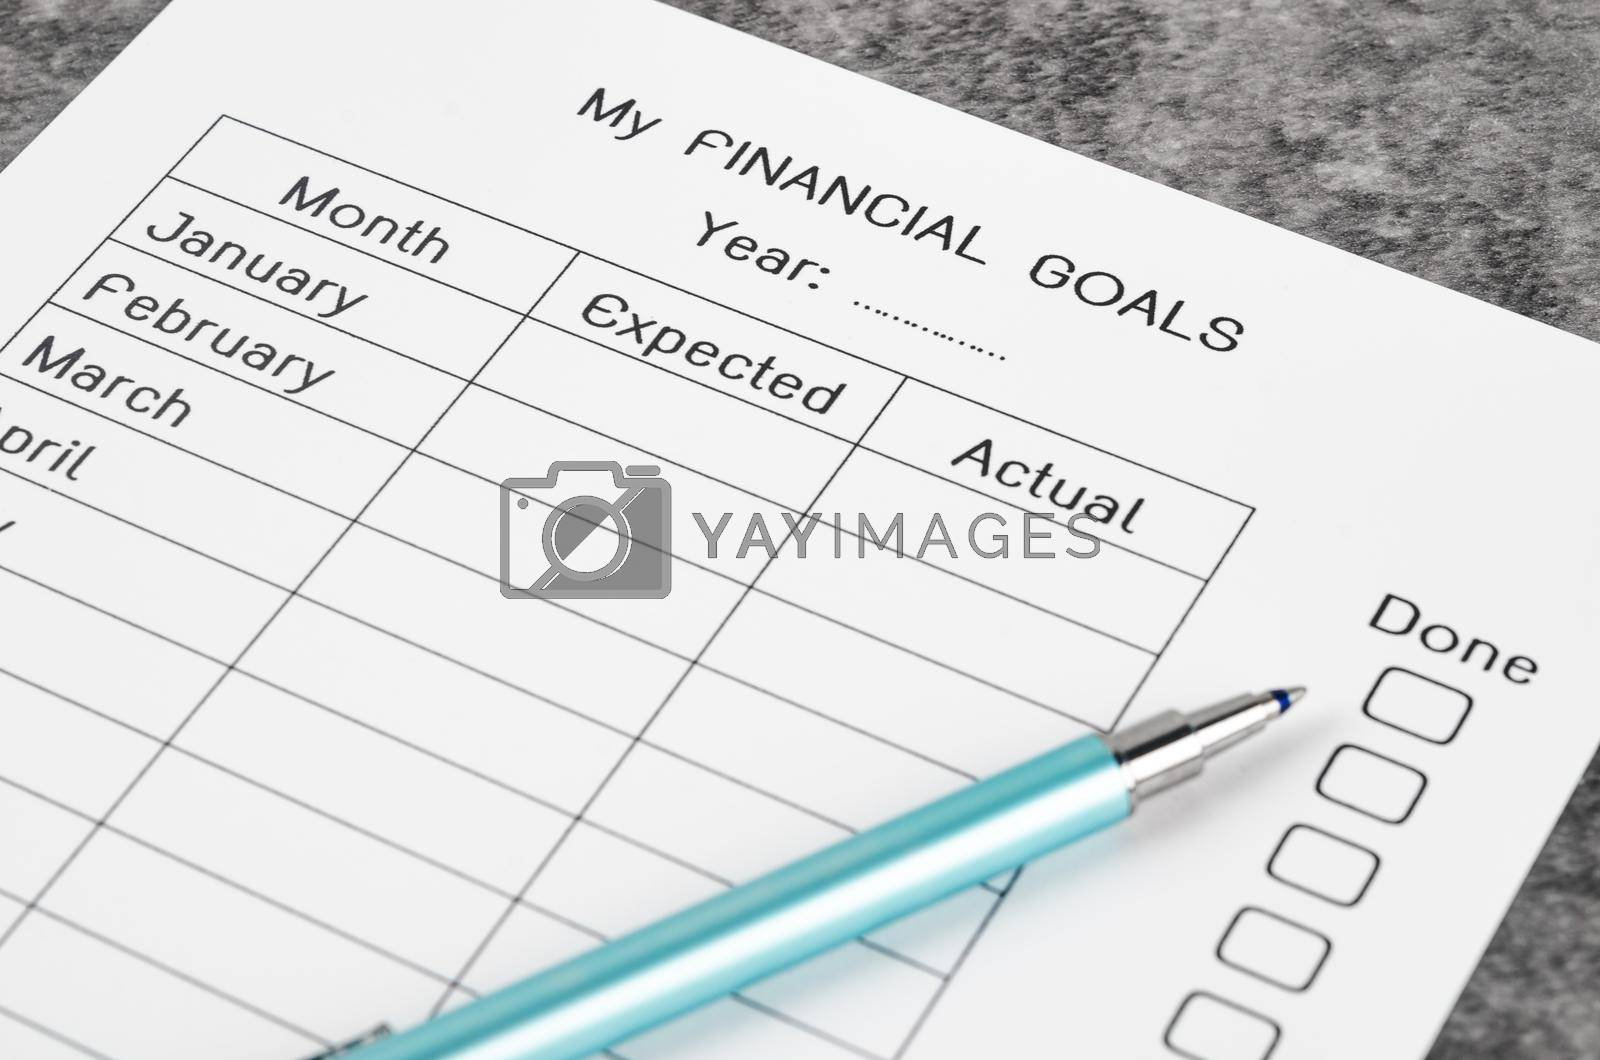 My planning financial goals form and pen.